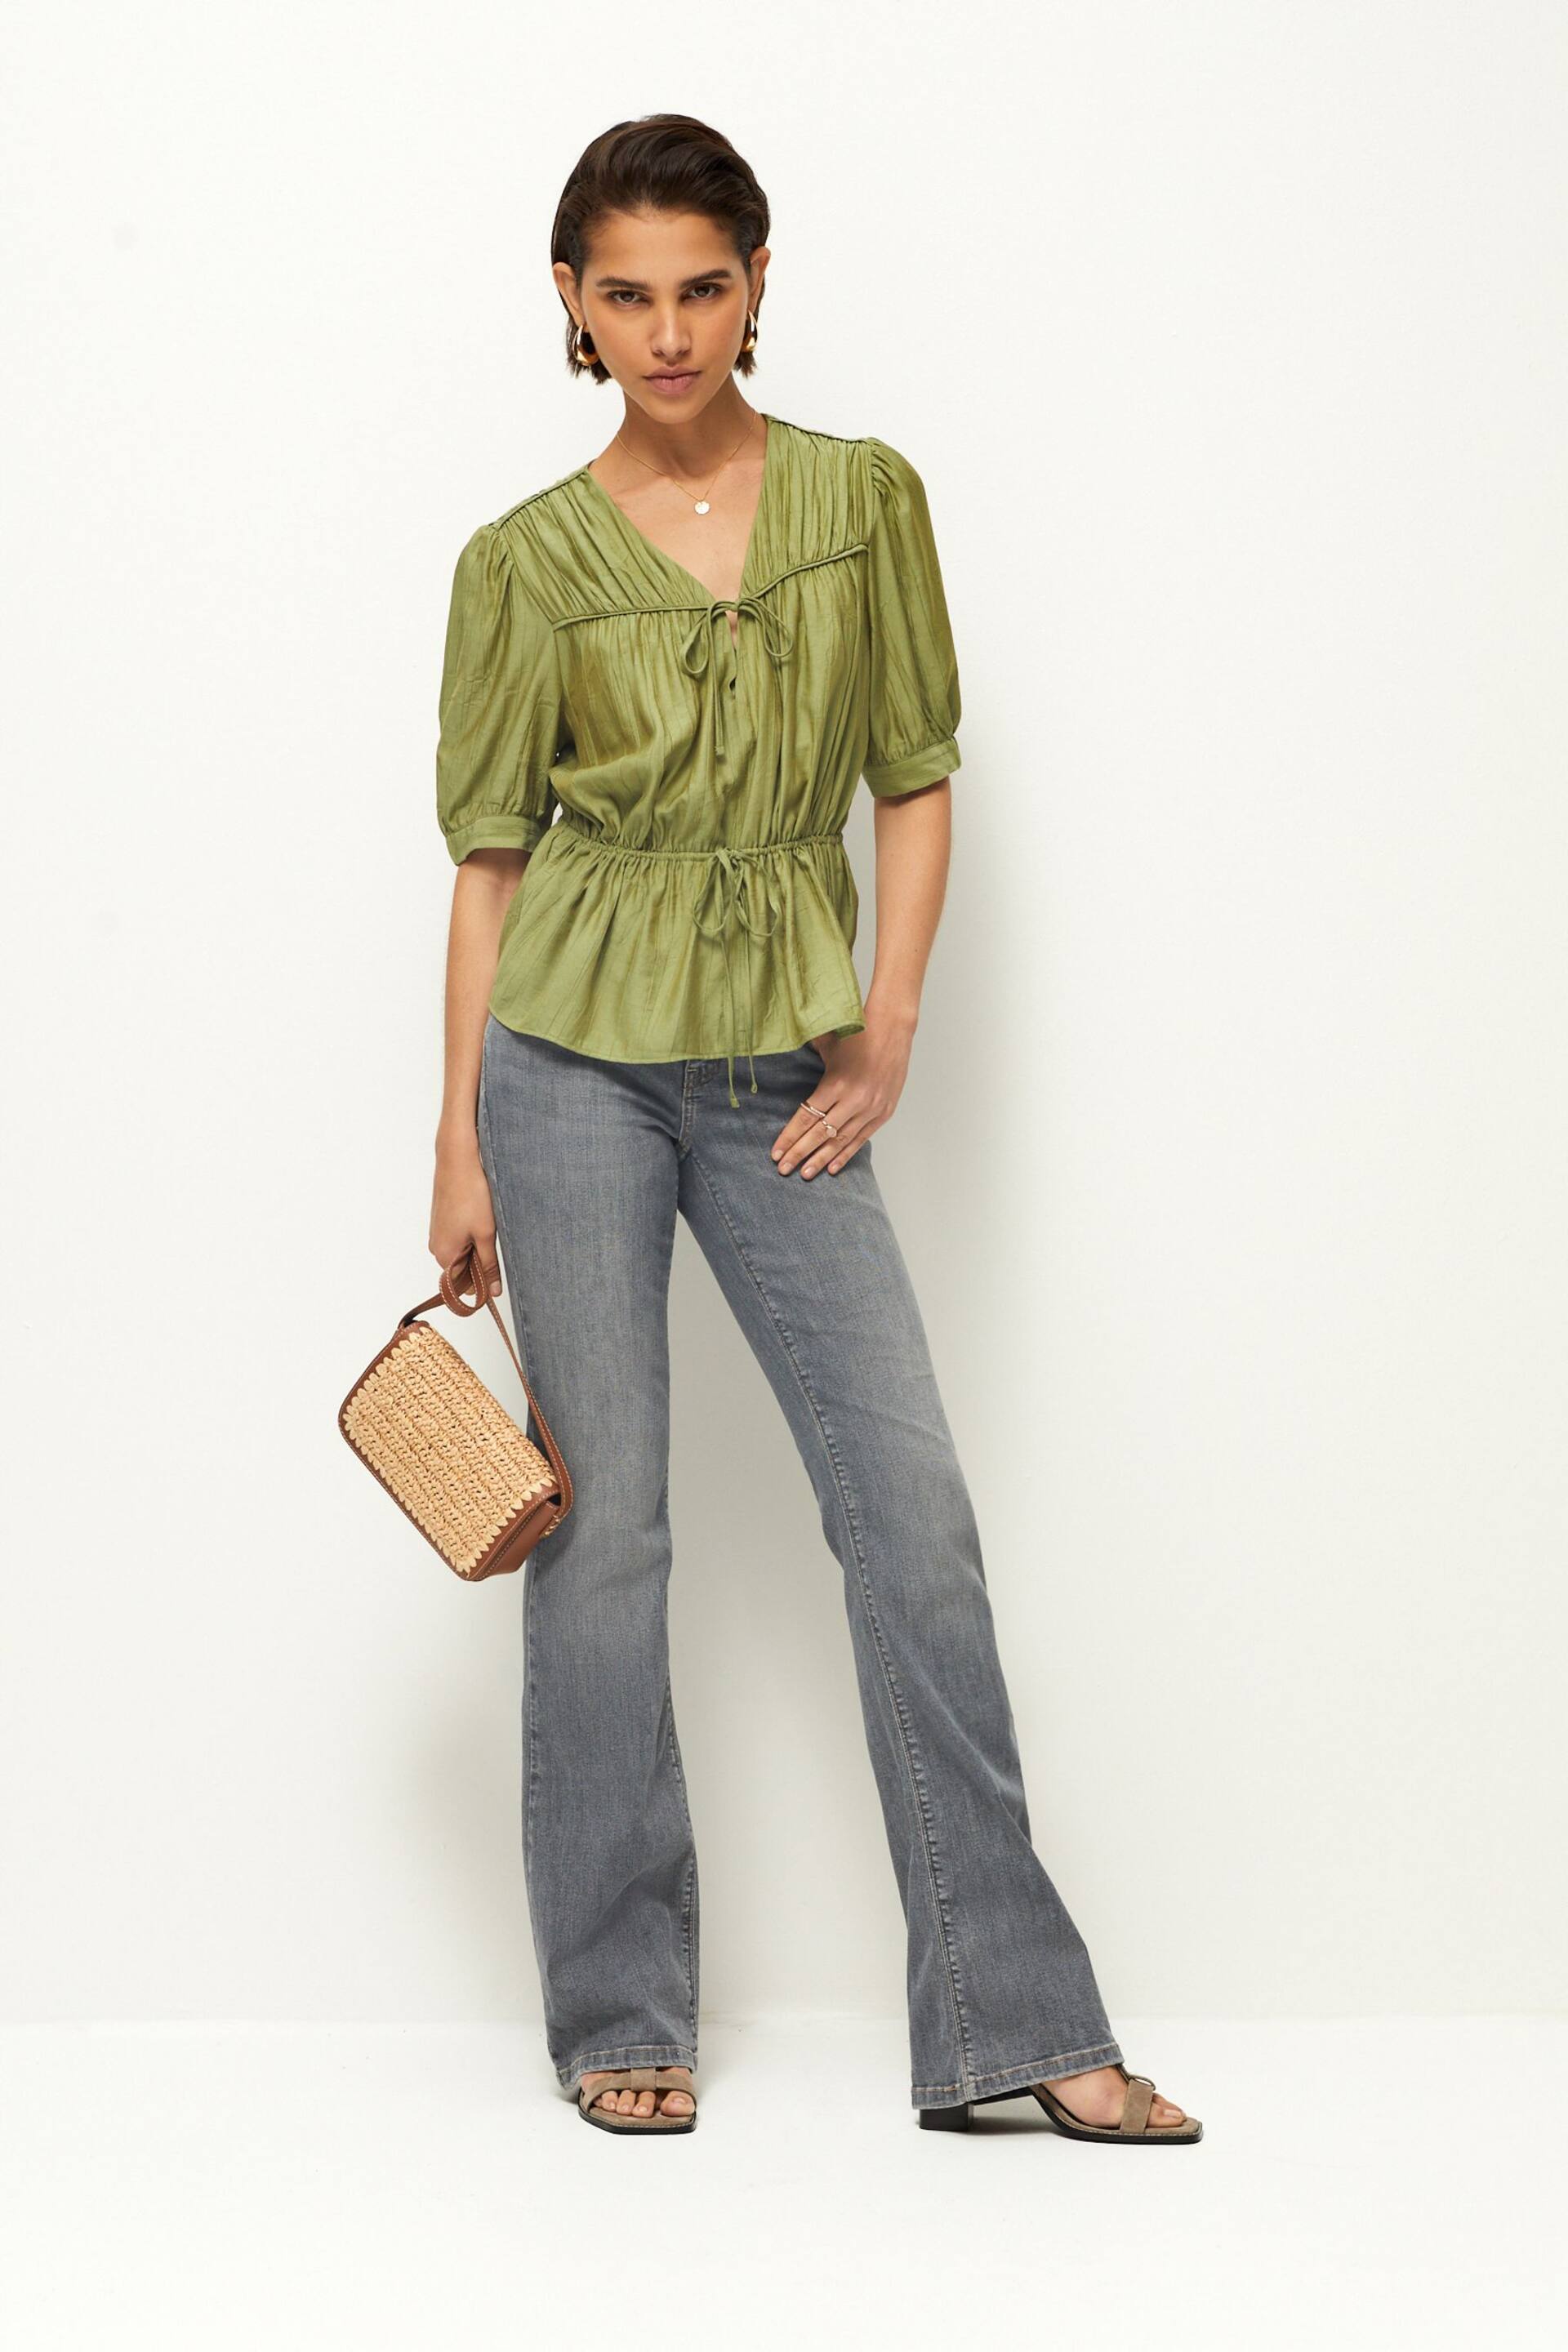 Green Tie Front Tiered Textured Short Sleeve Blouse - Image 2 of 6